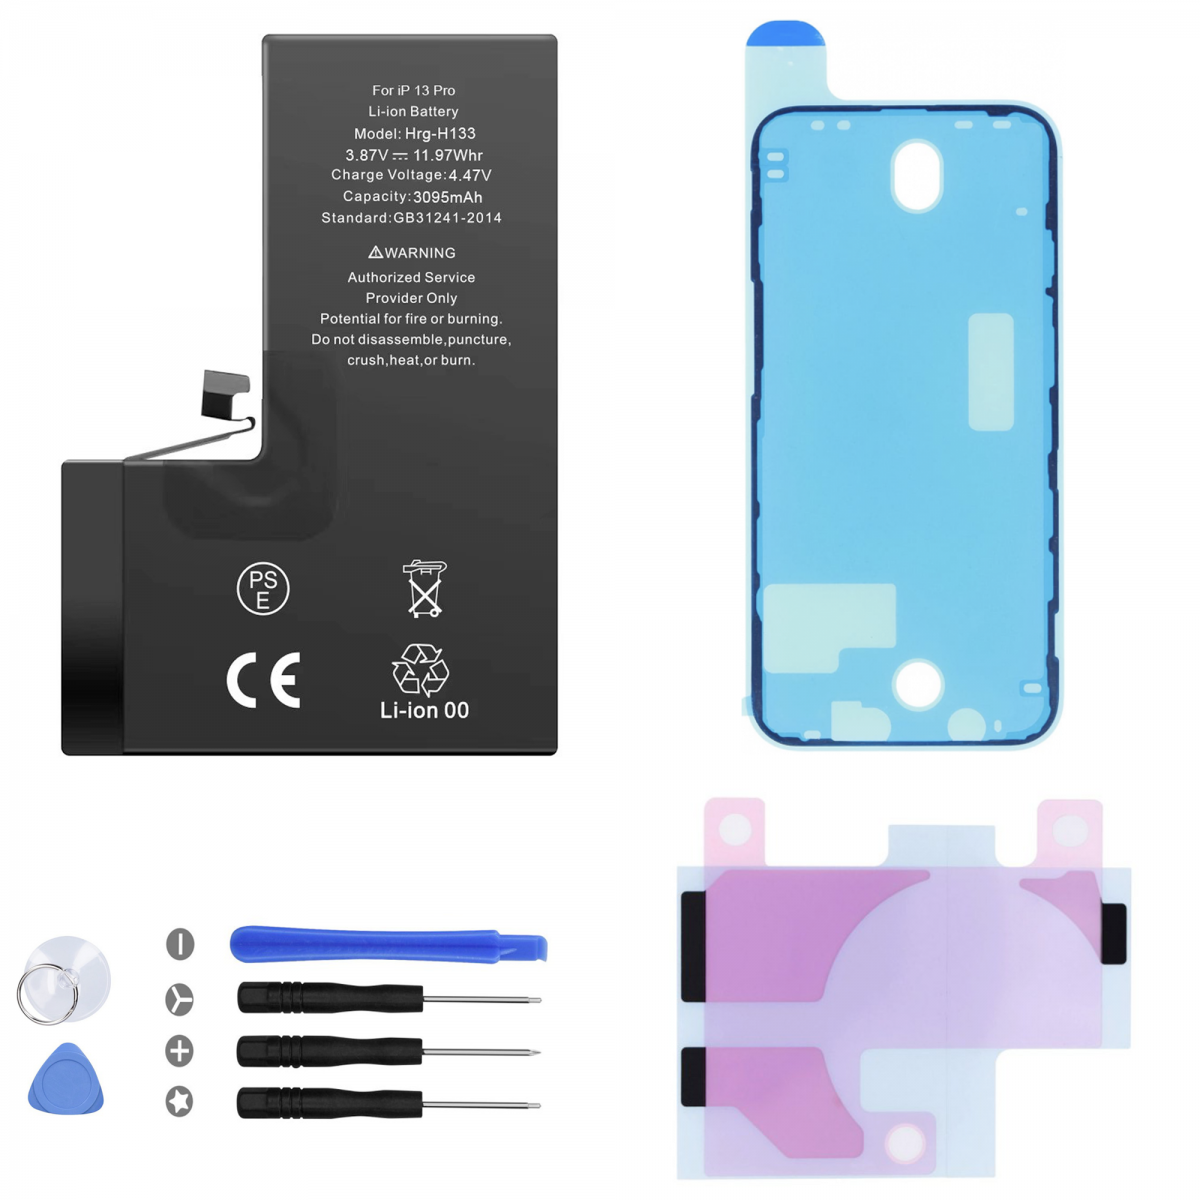 Kit Batterie iPhone X : Batterie + Outils + Stickers + Joint